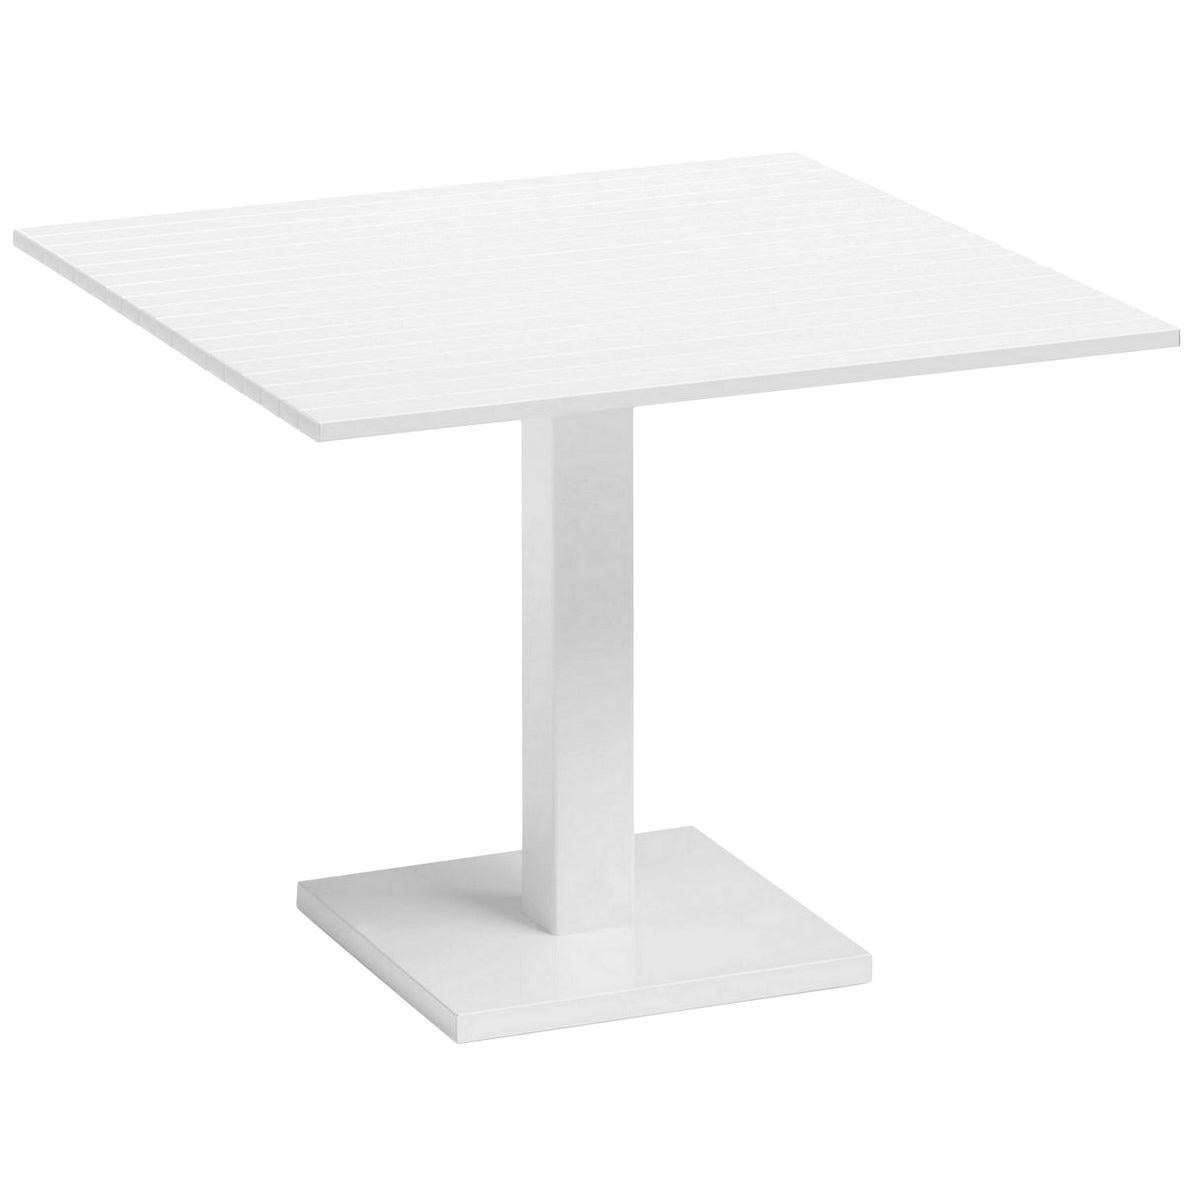 In Stock in Los Angeles, White Lacquered Aluminium Outdoor Orione Table